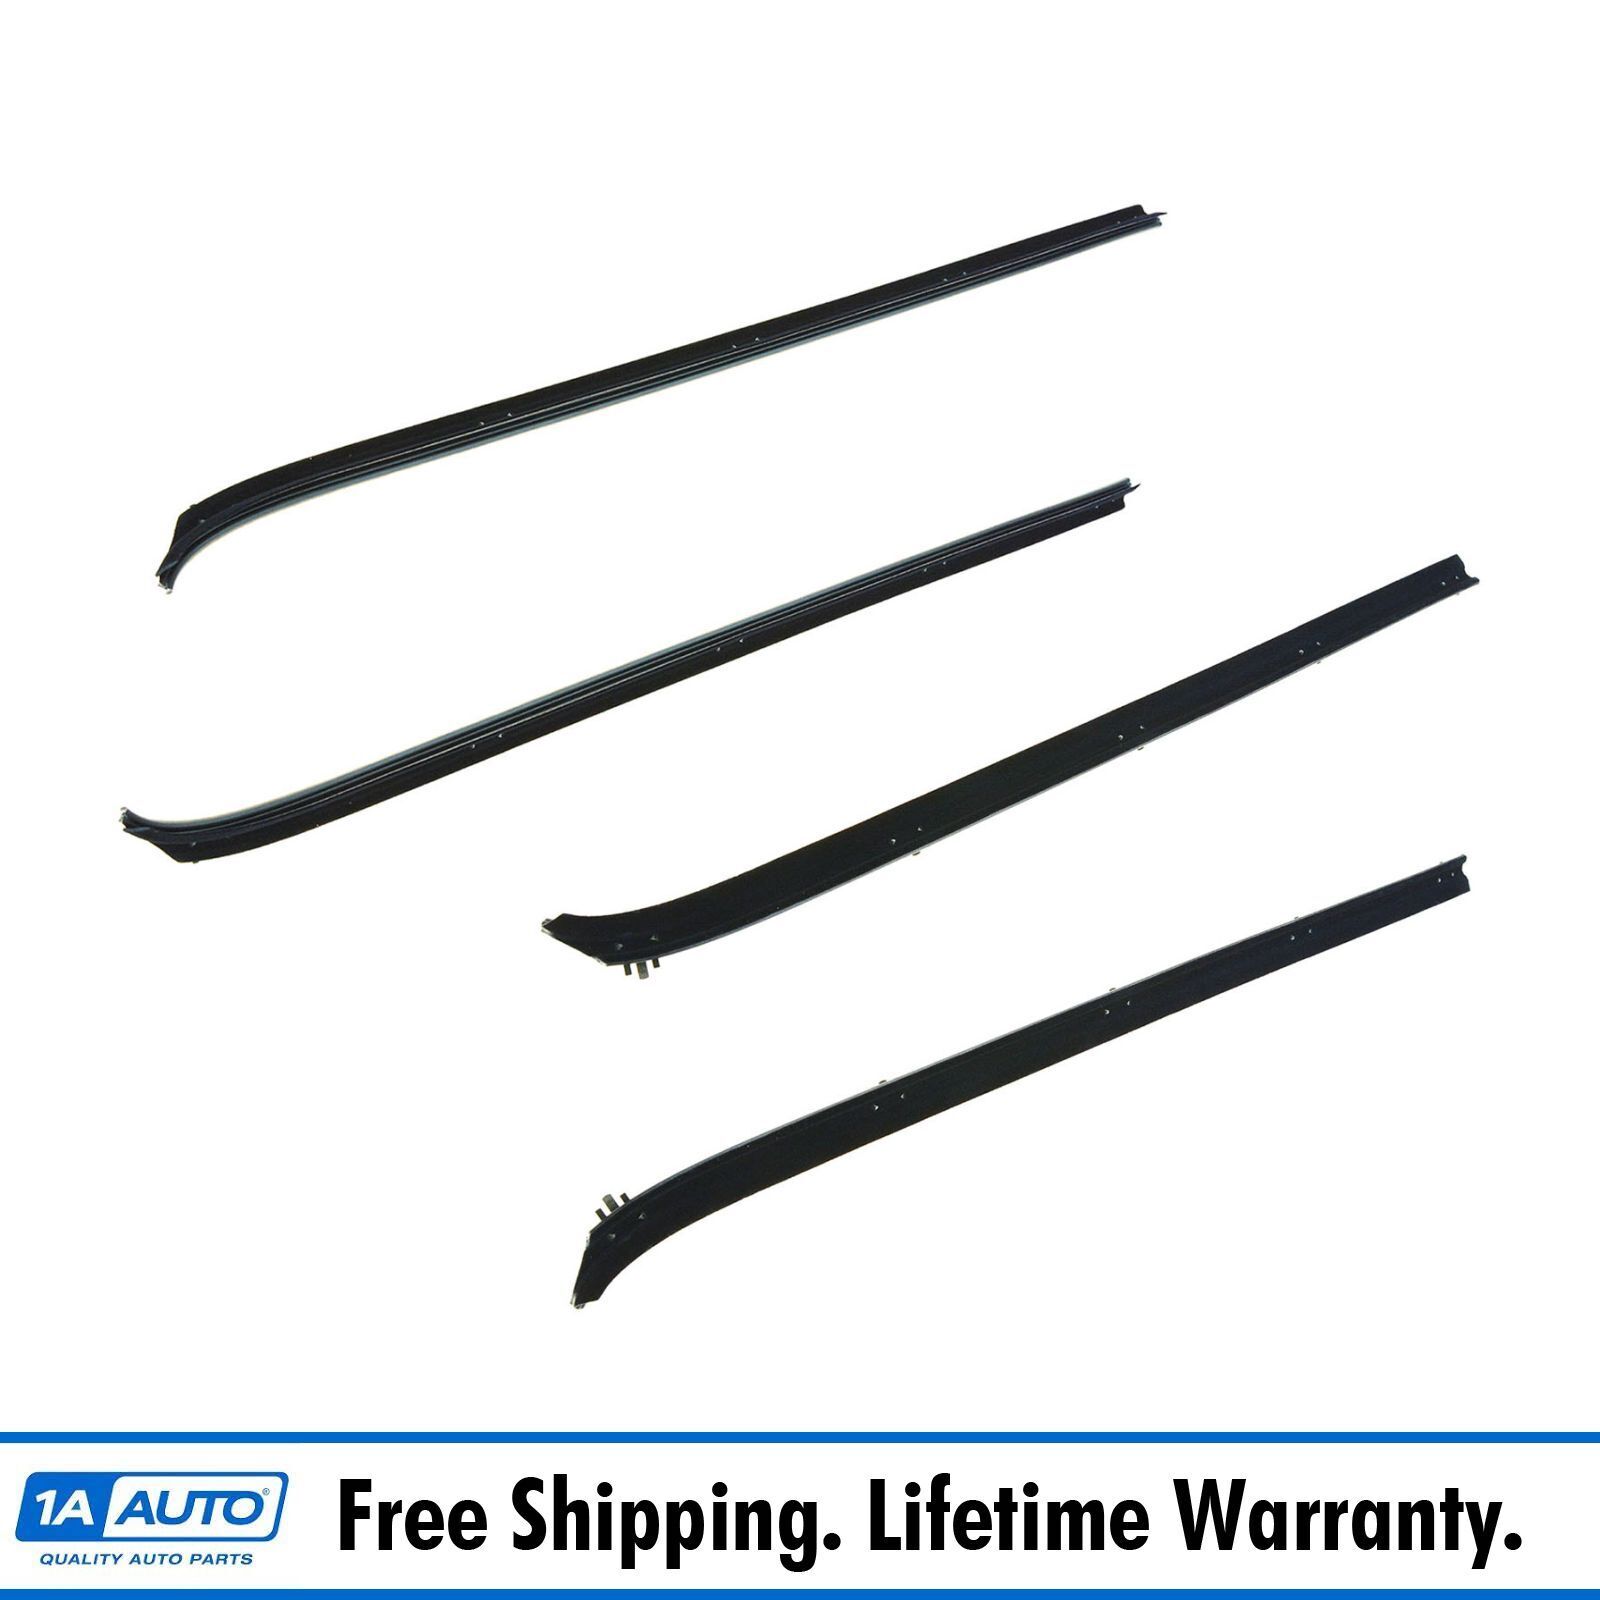 Front Inner & Outer Window Sweep Kit Set of 4 for Ramcharger Pickup Trailduster